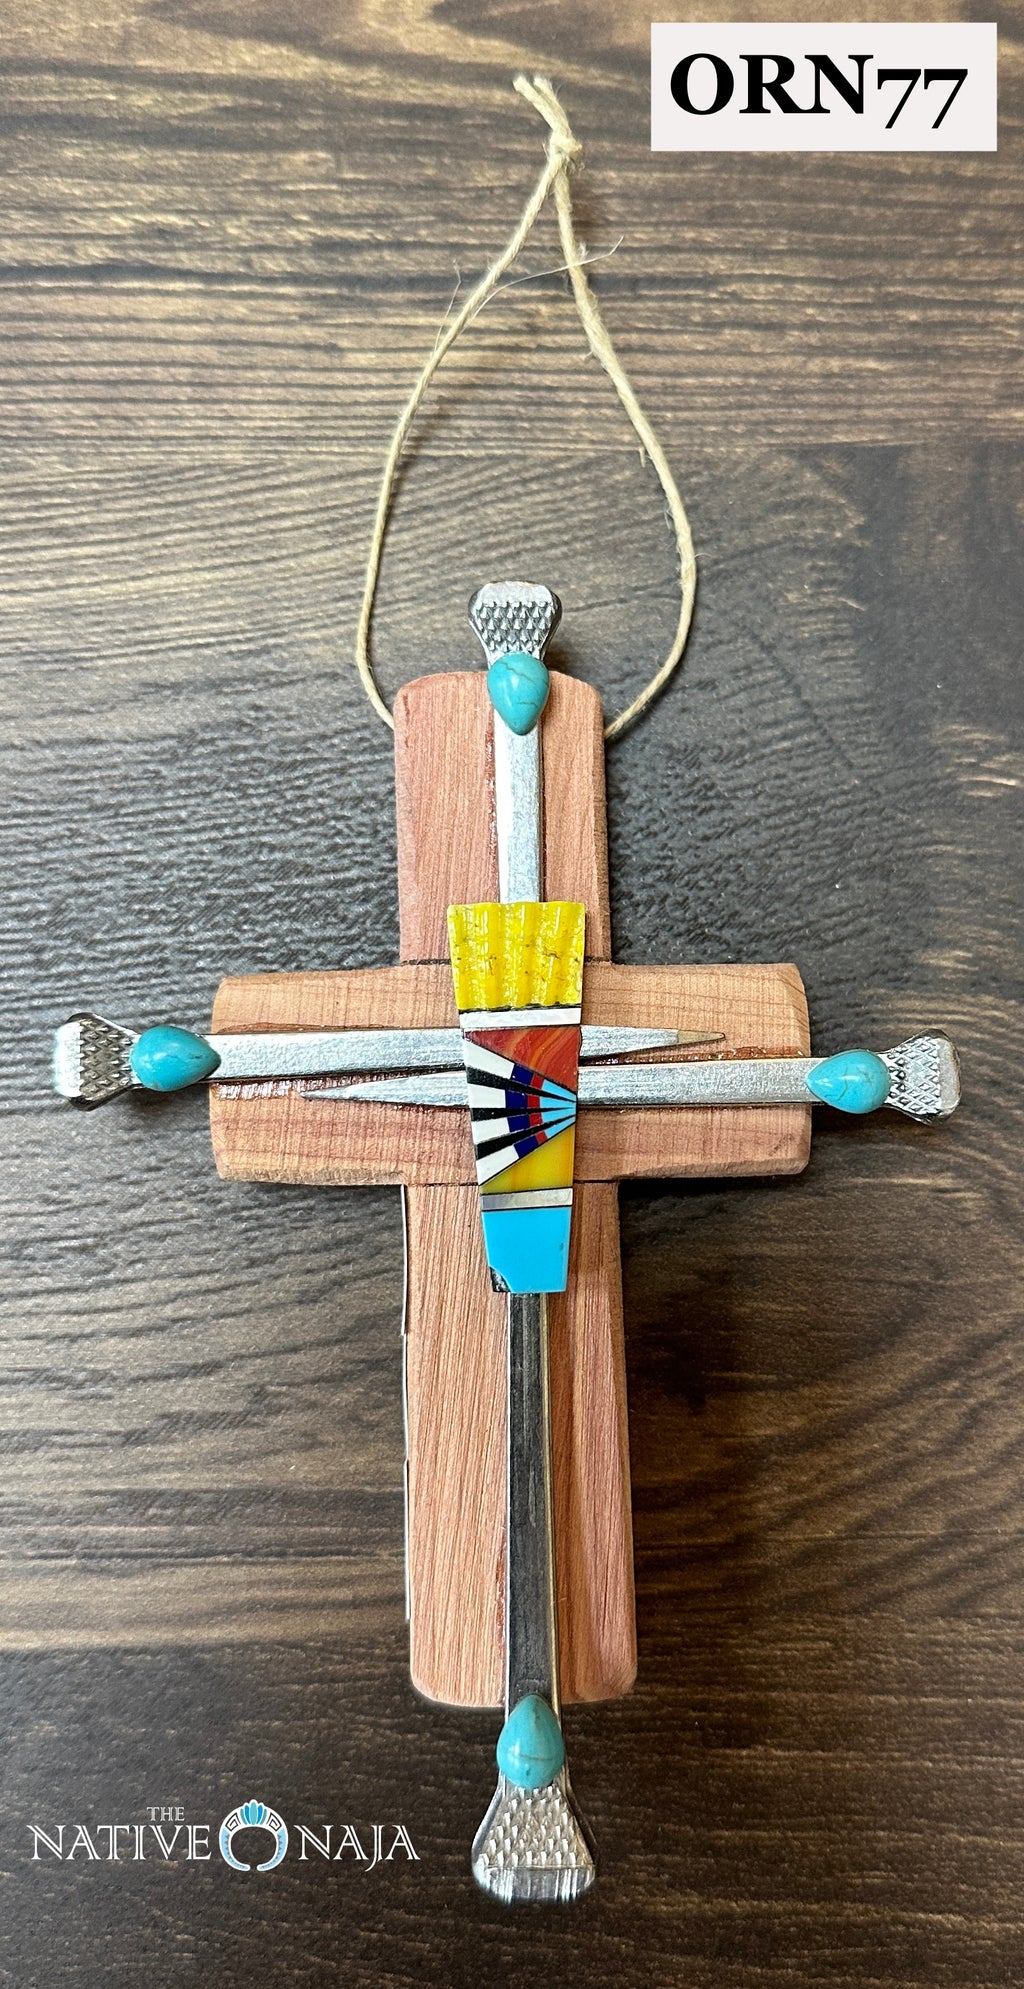 4"X5" Small Hanging Cross Ornament by NM Native American Artist Kenny Gallegos ORN77